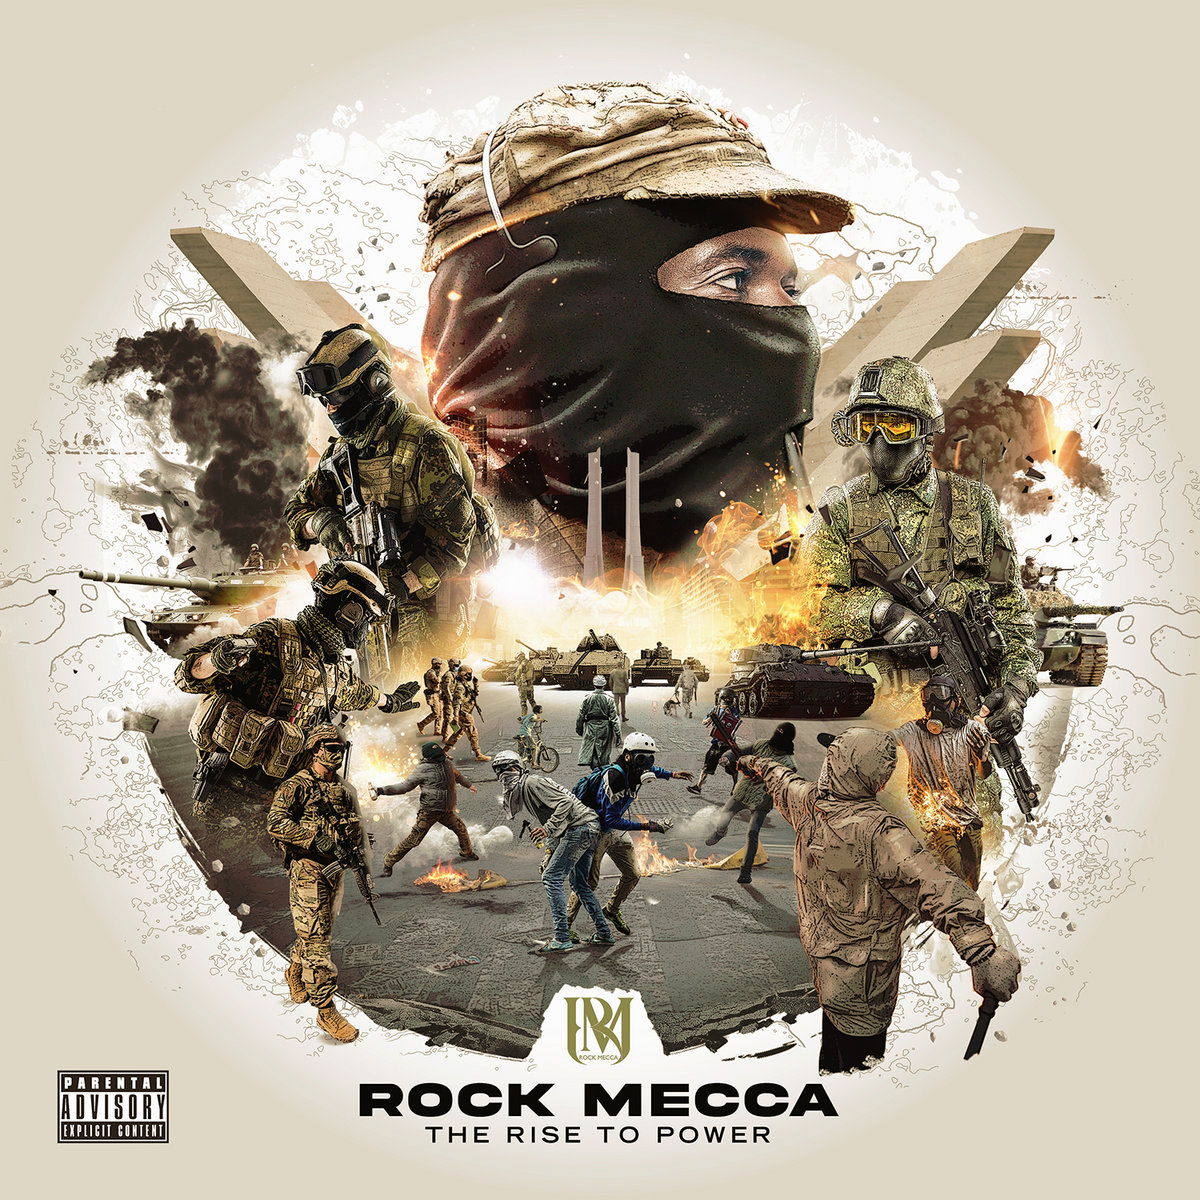 The_rise_to_power_rock_mecca